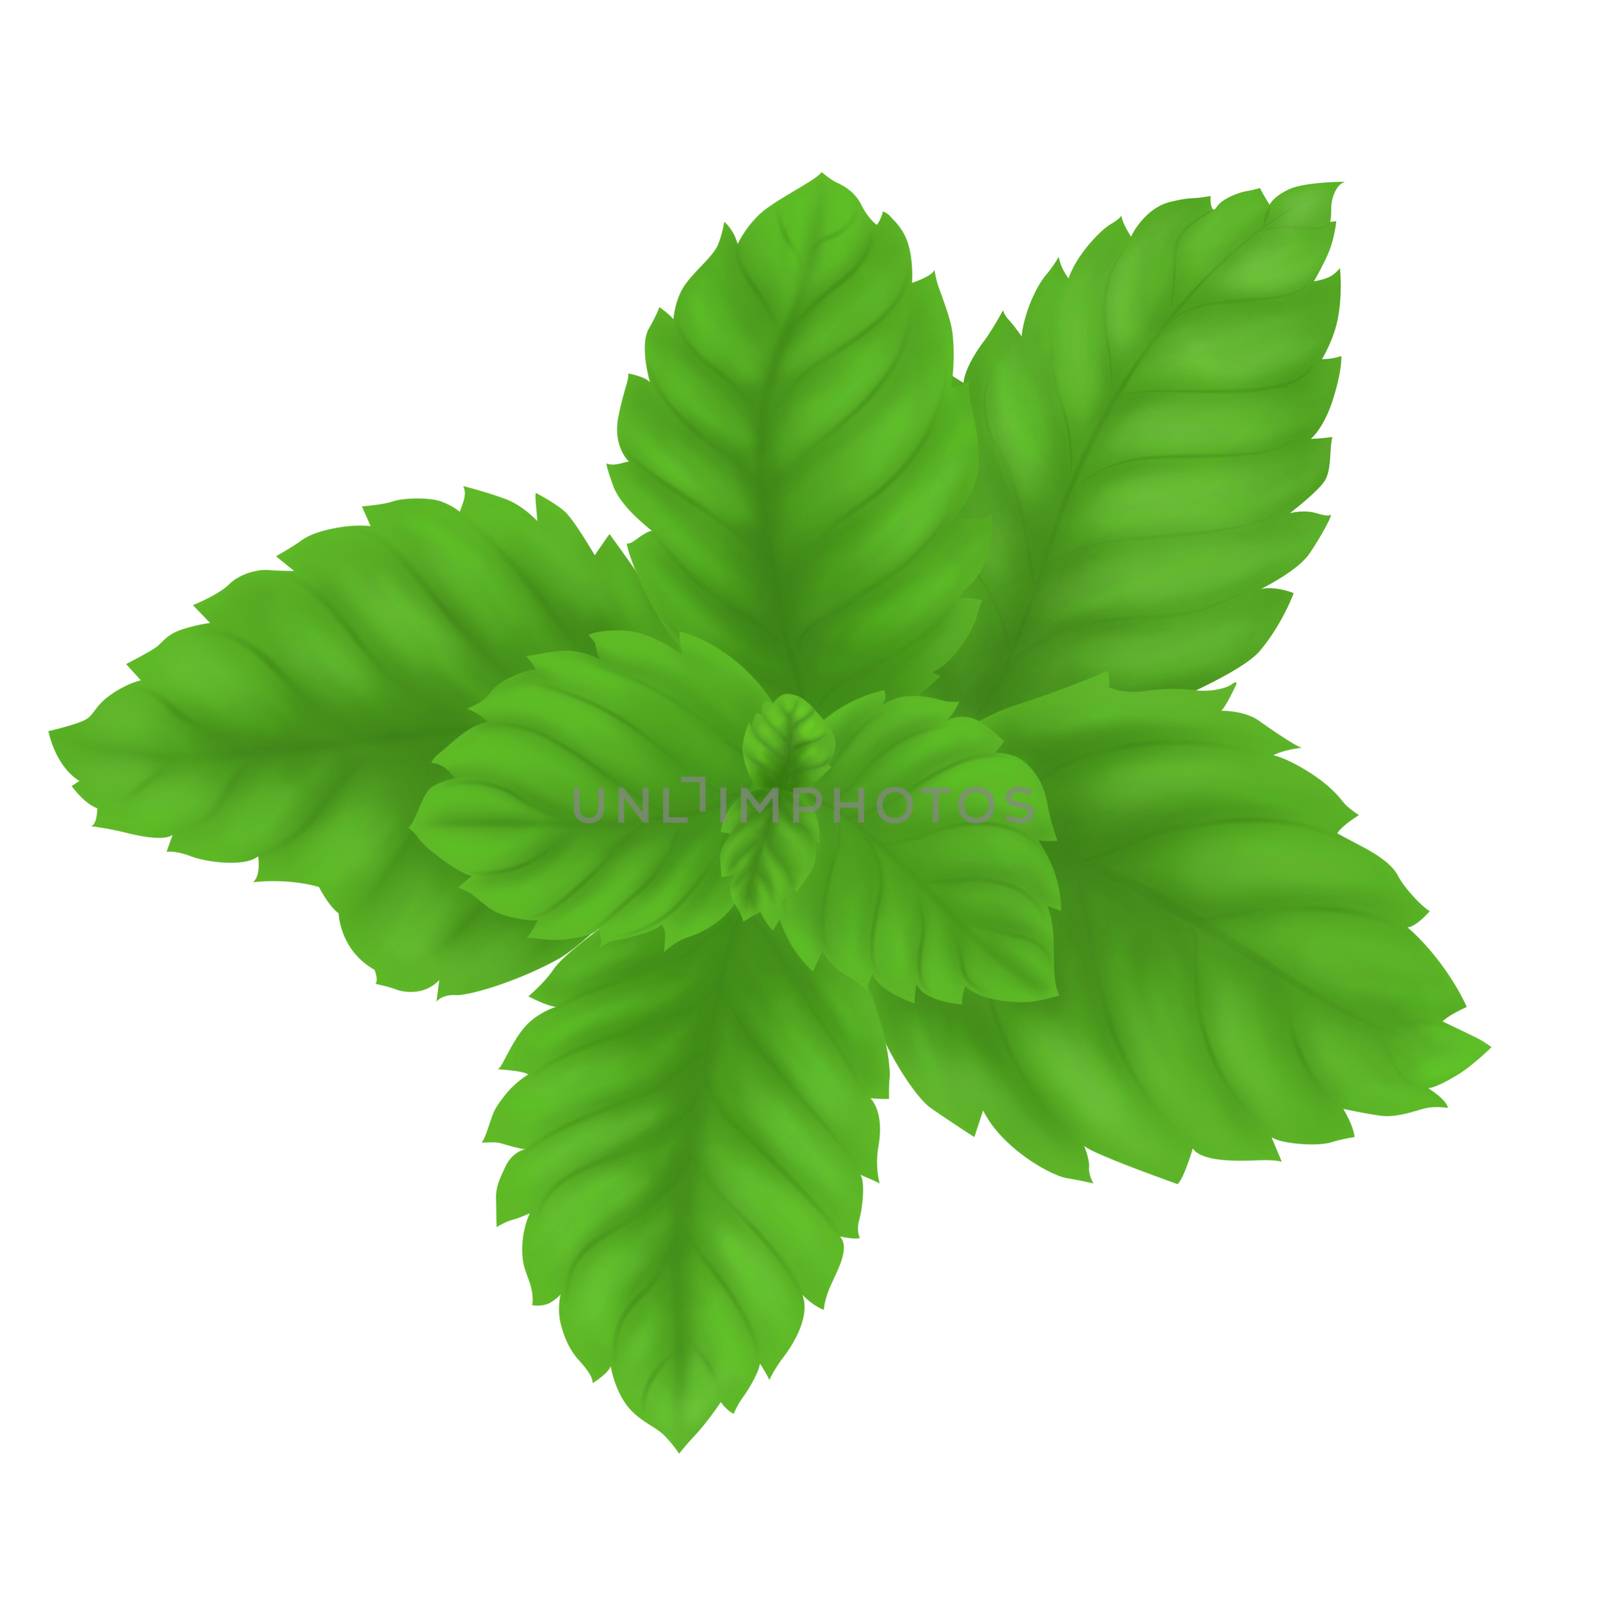 Digital painting pepper mint leaves isolated on white background, herb and medical concept